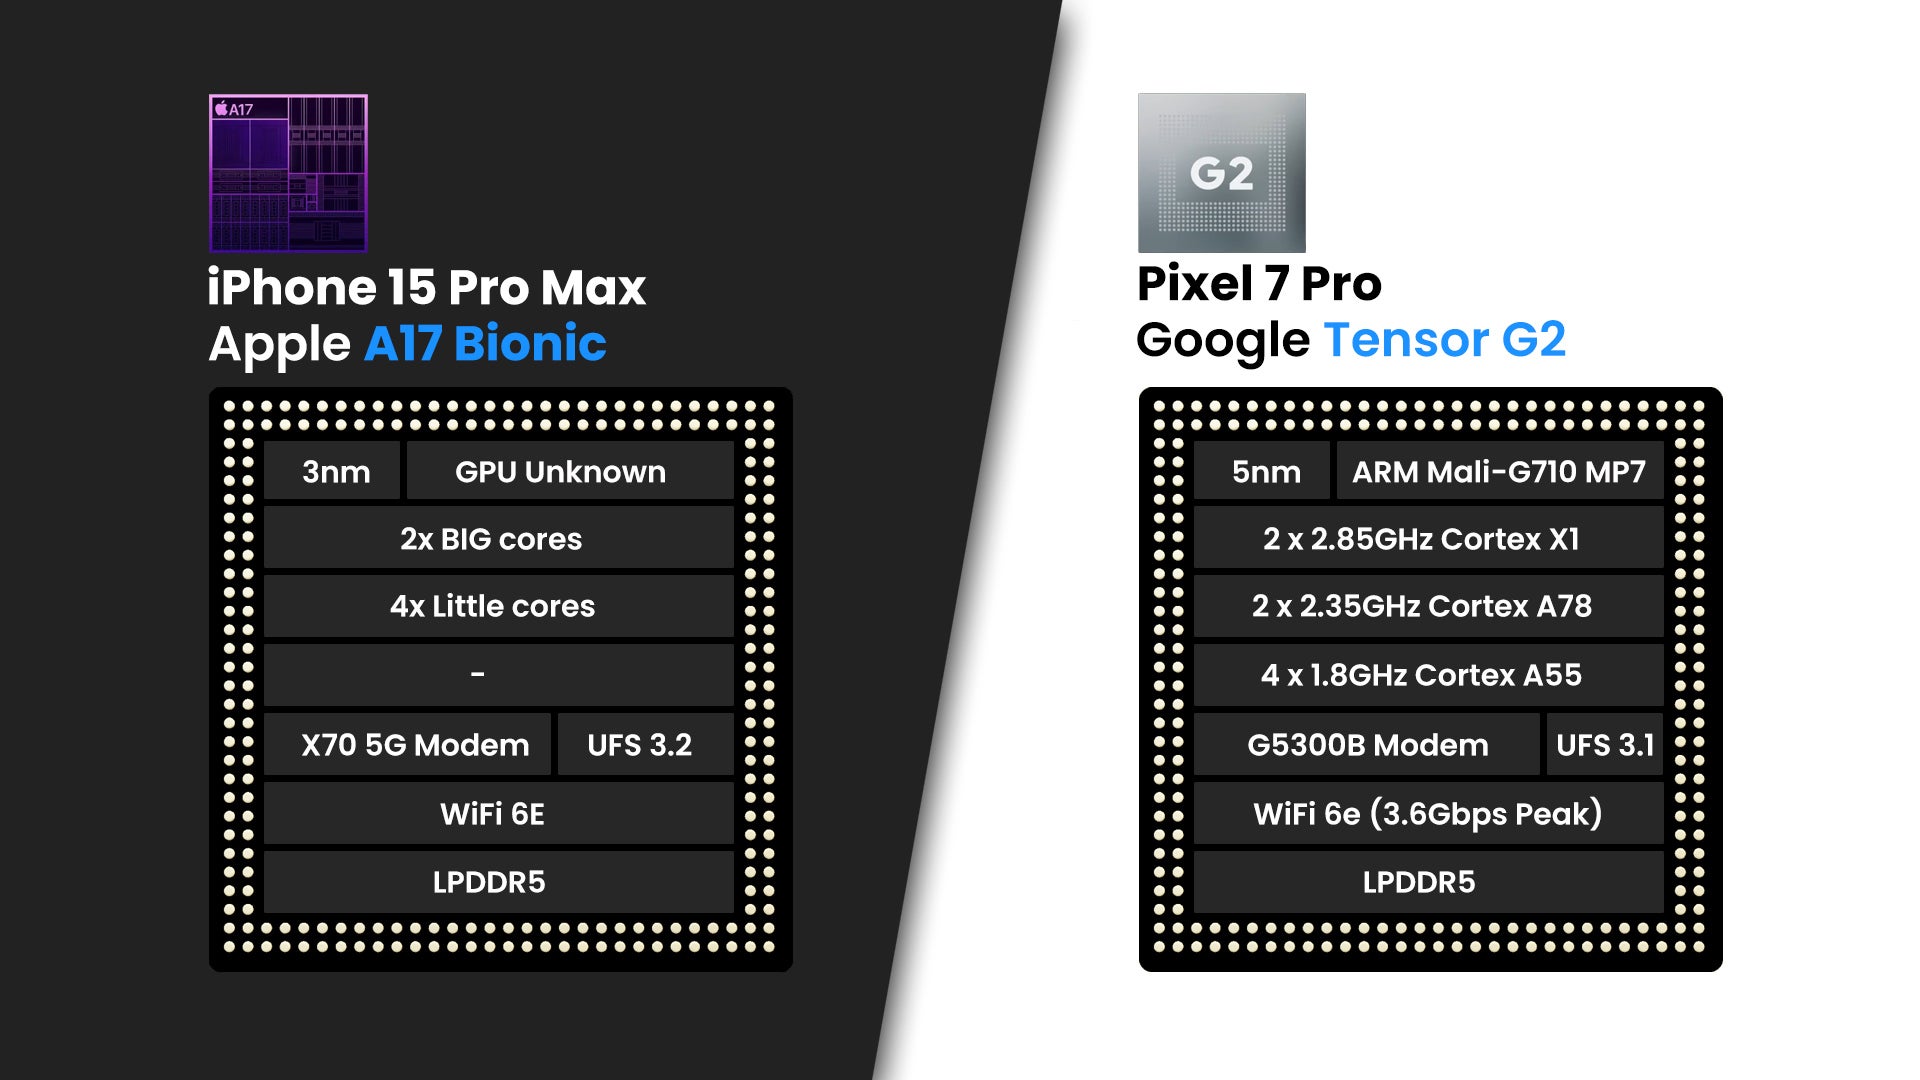 iPhone 15 Pro Max vs Pixel 7 Pro: Expected differences